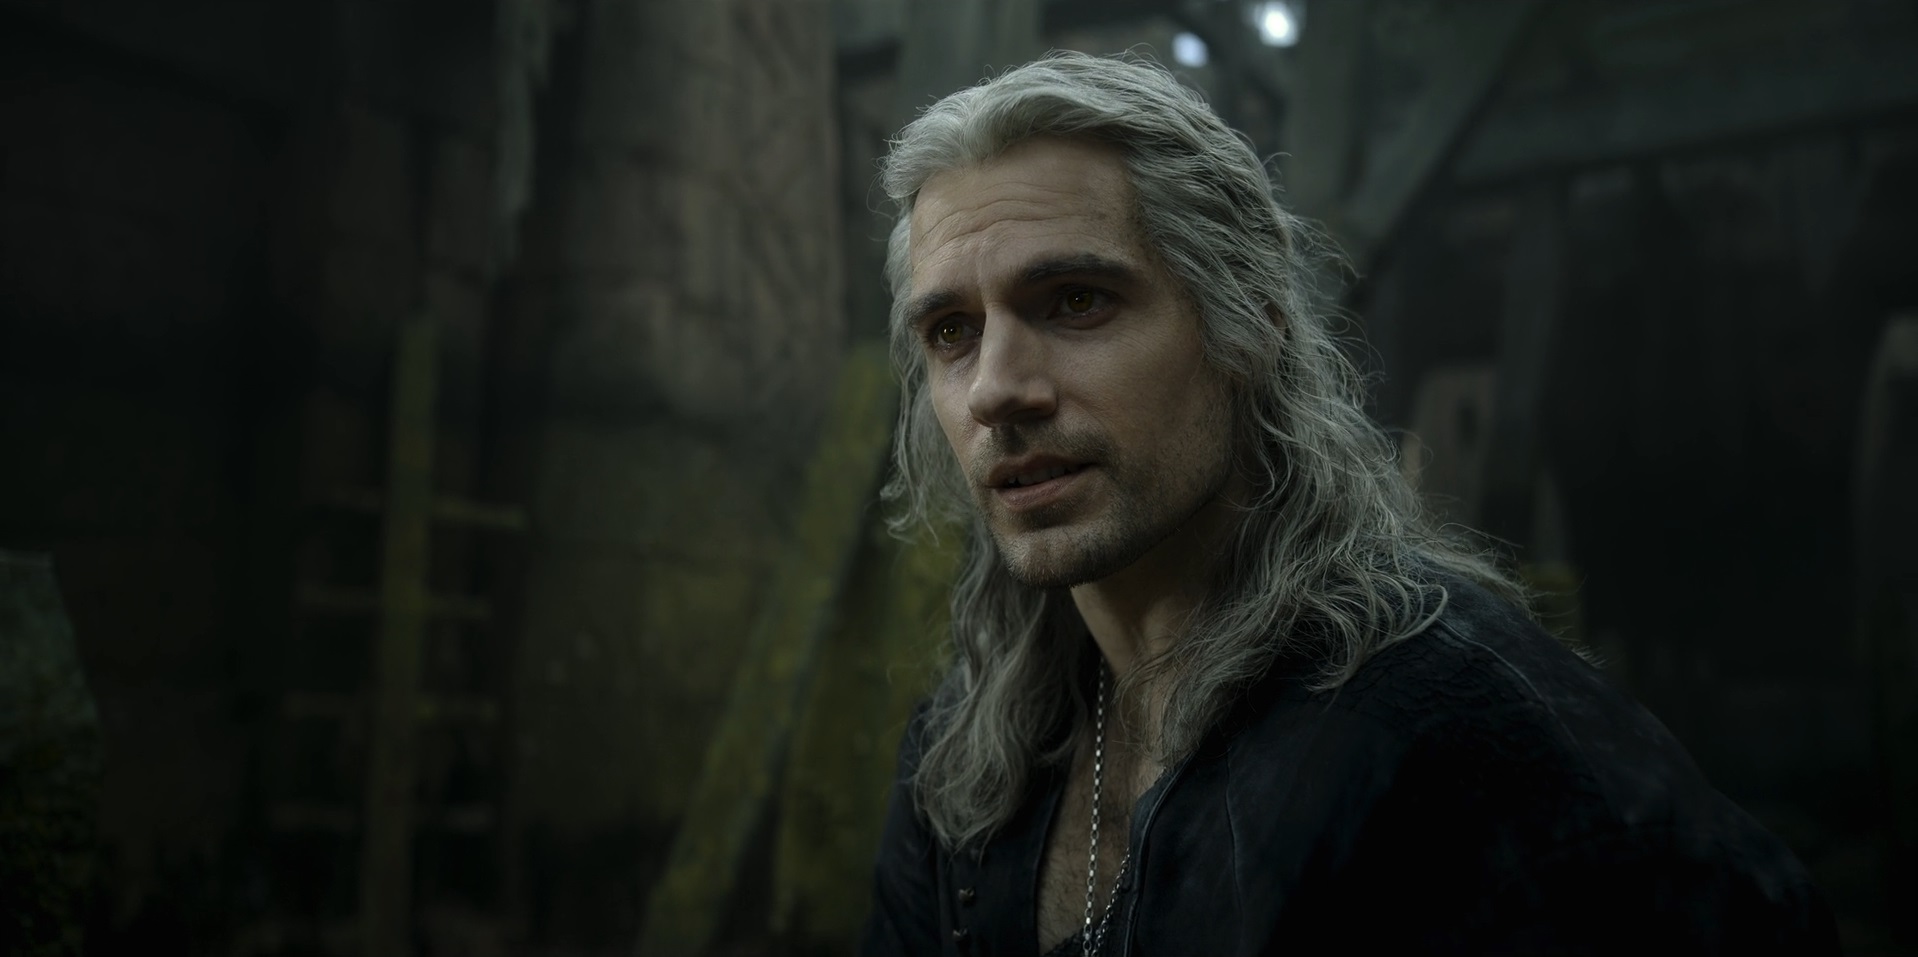 The Witcher Season 4 to Resume Writing, Likely to End With Season 5 -  Redanian Intelligence